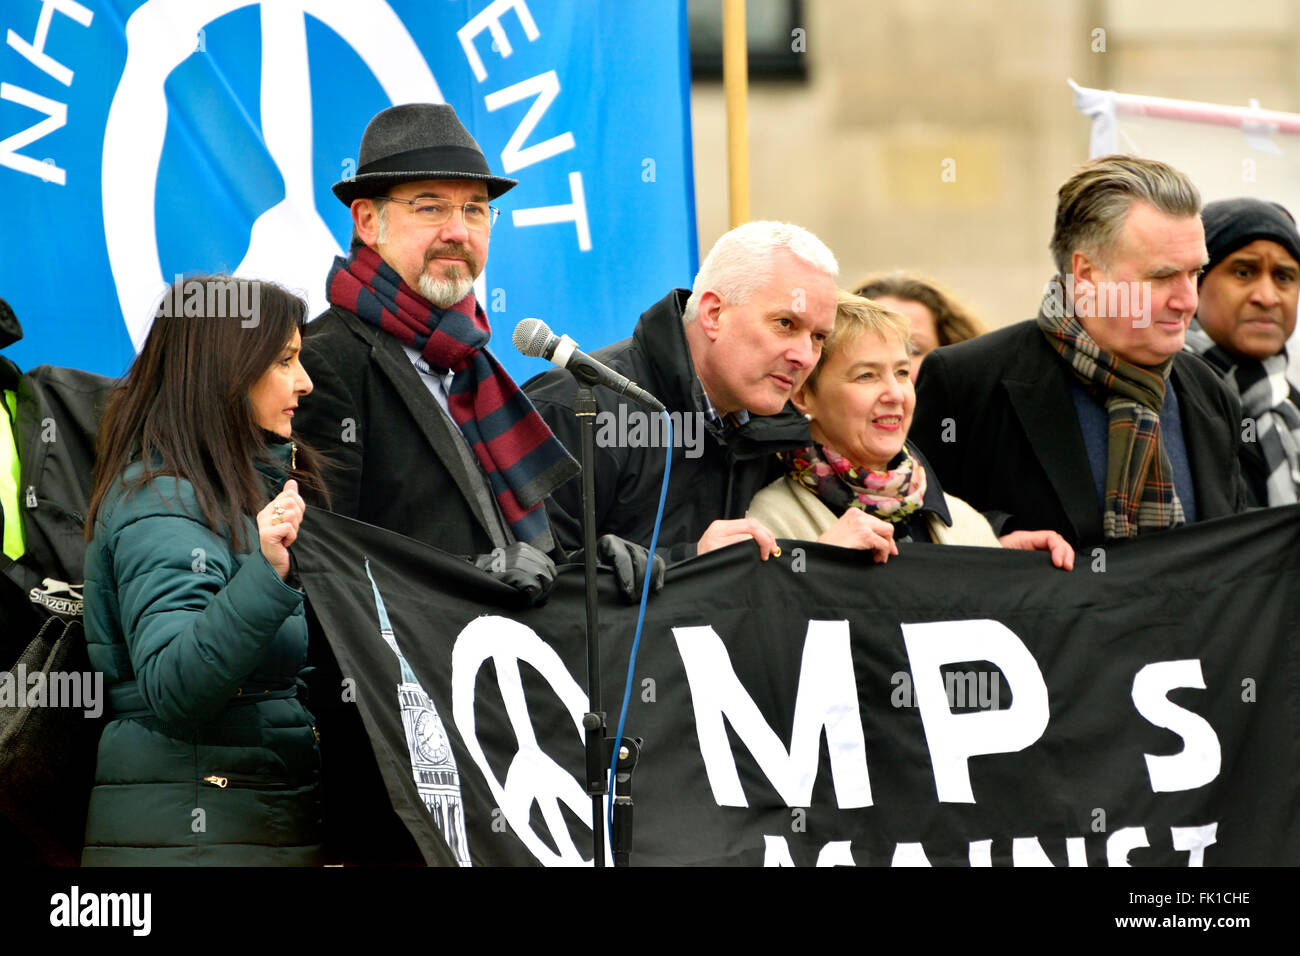 SNP Members of Parliament hold an 'MPs Against Trident, banner, Trafalgar Square, London 27th Feb 2016. L-R: (see 'description') Stock Photo